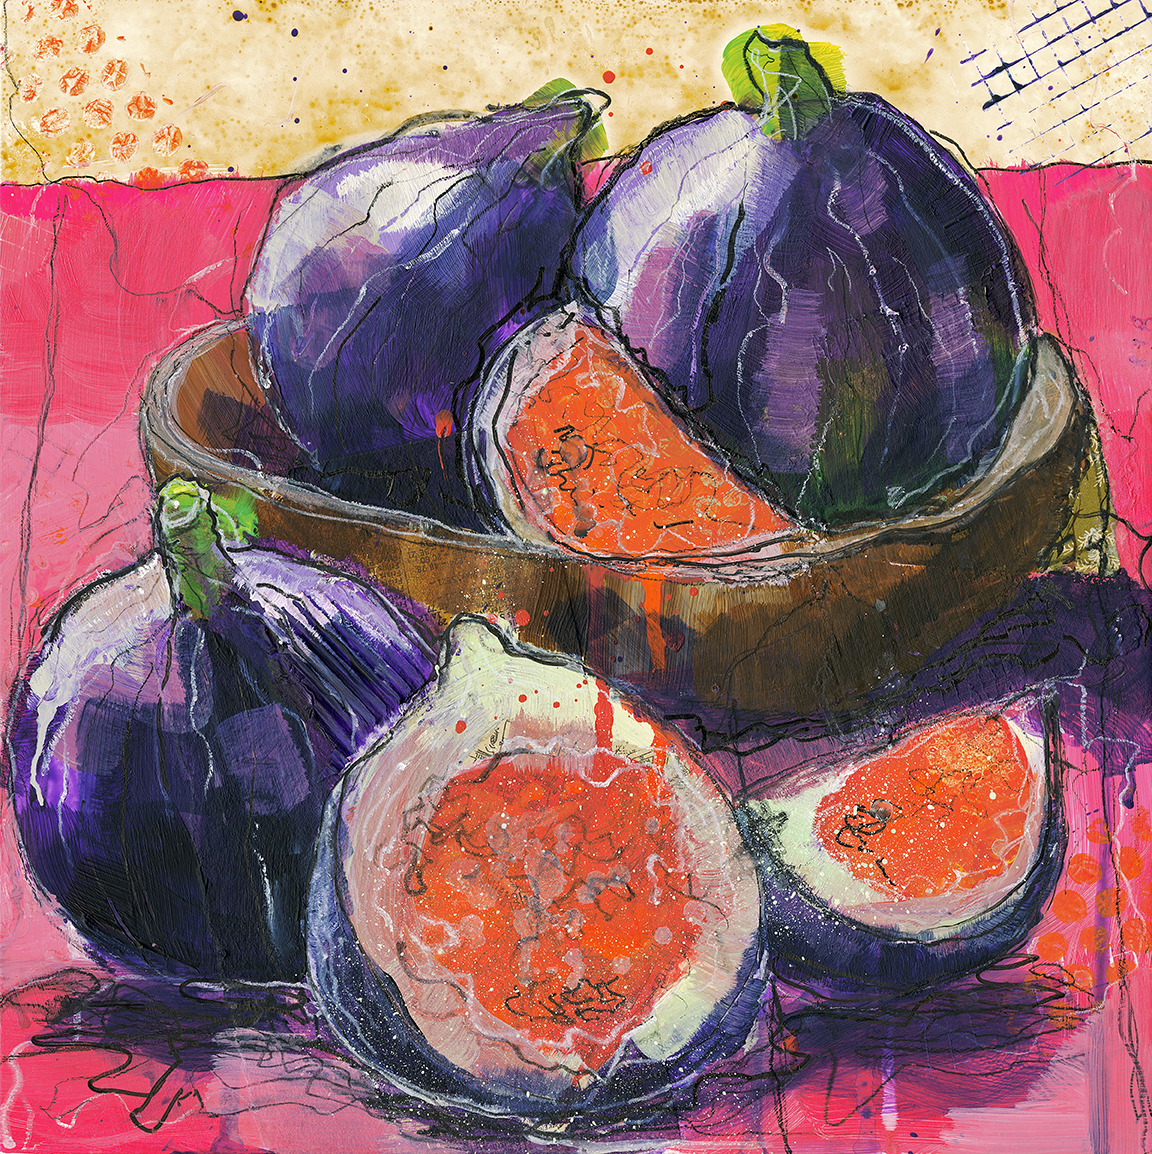 Affordable Still Life Art of Figs by Emma Sherry